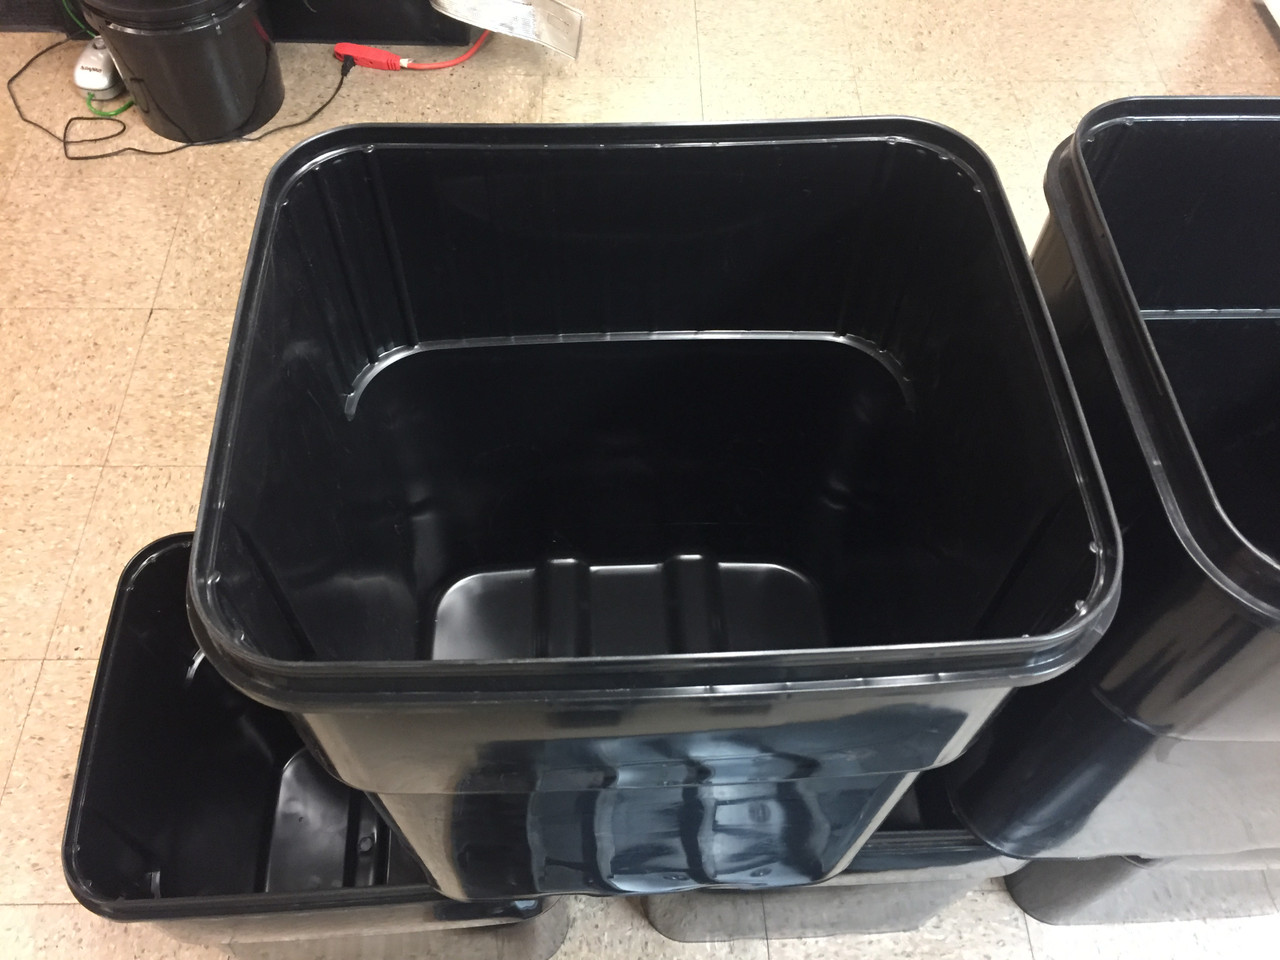 5 Pack With Lids, 13 Gallon EZ Stor™ Container/Buckets w/Lid